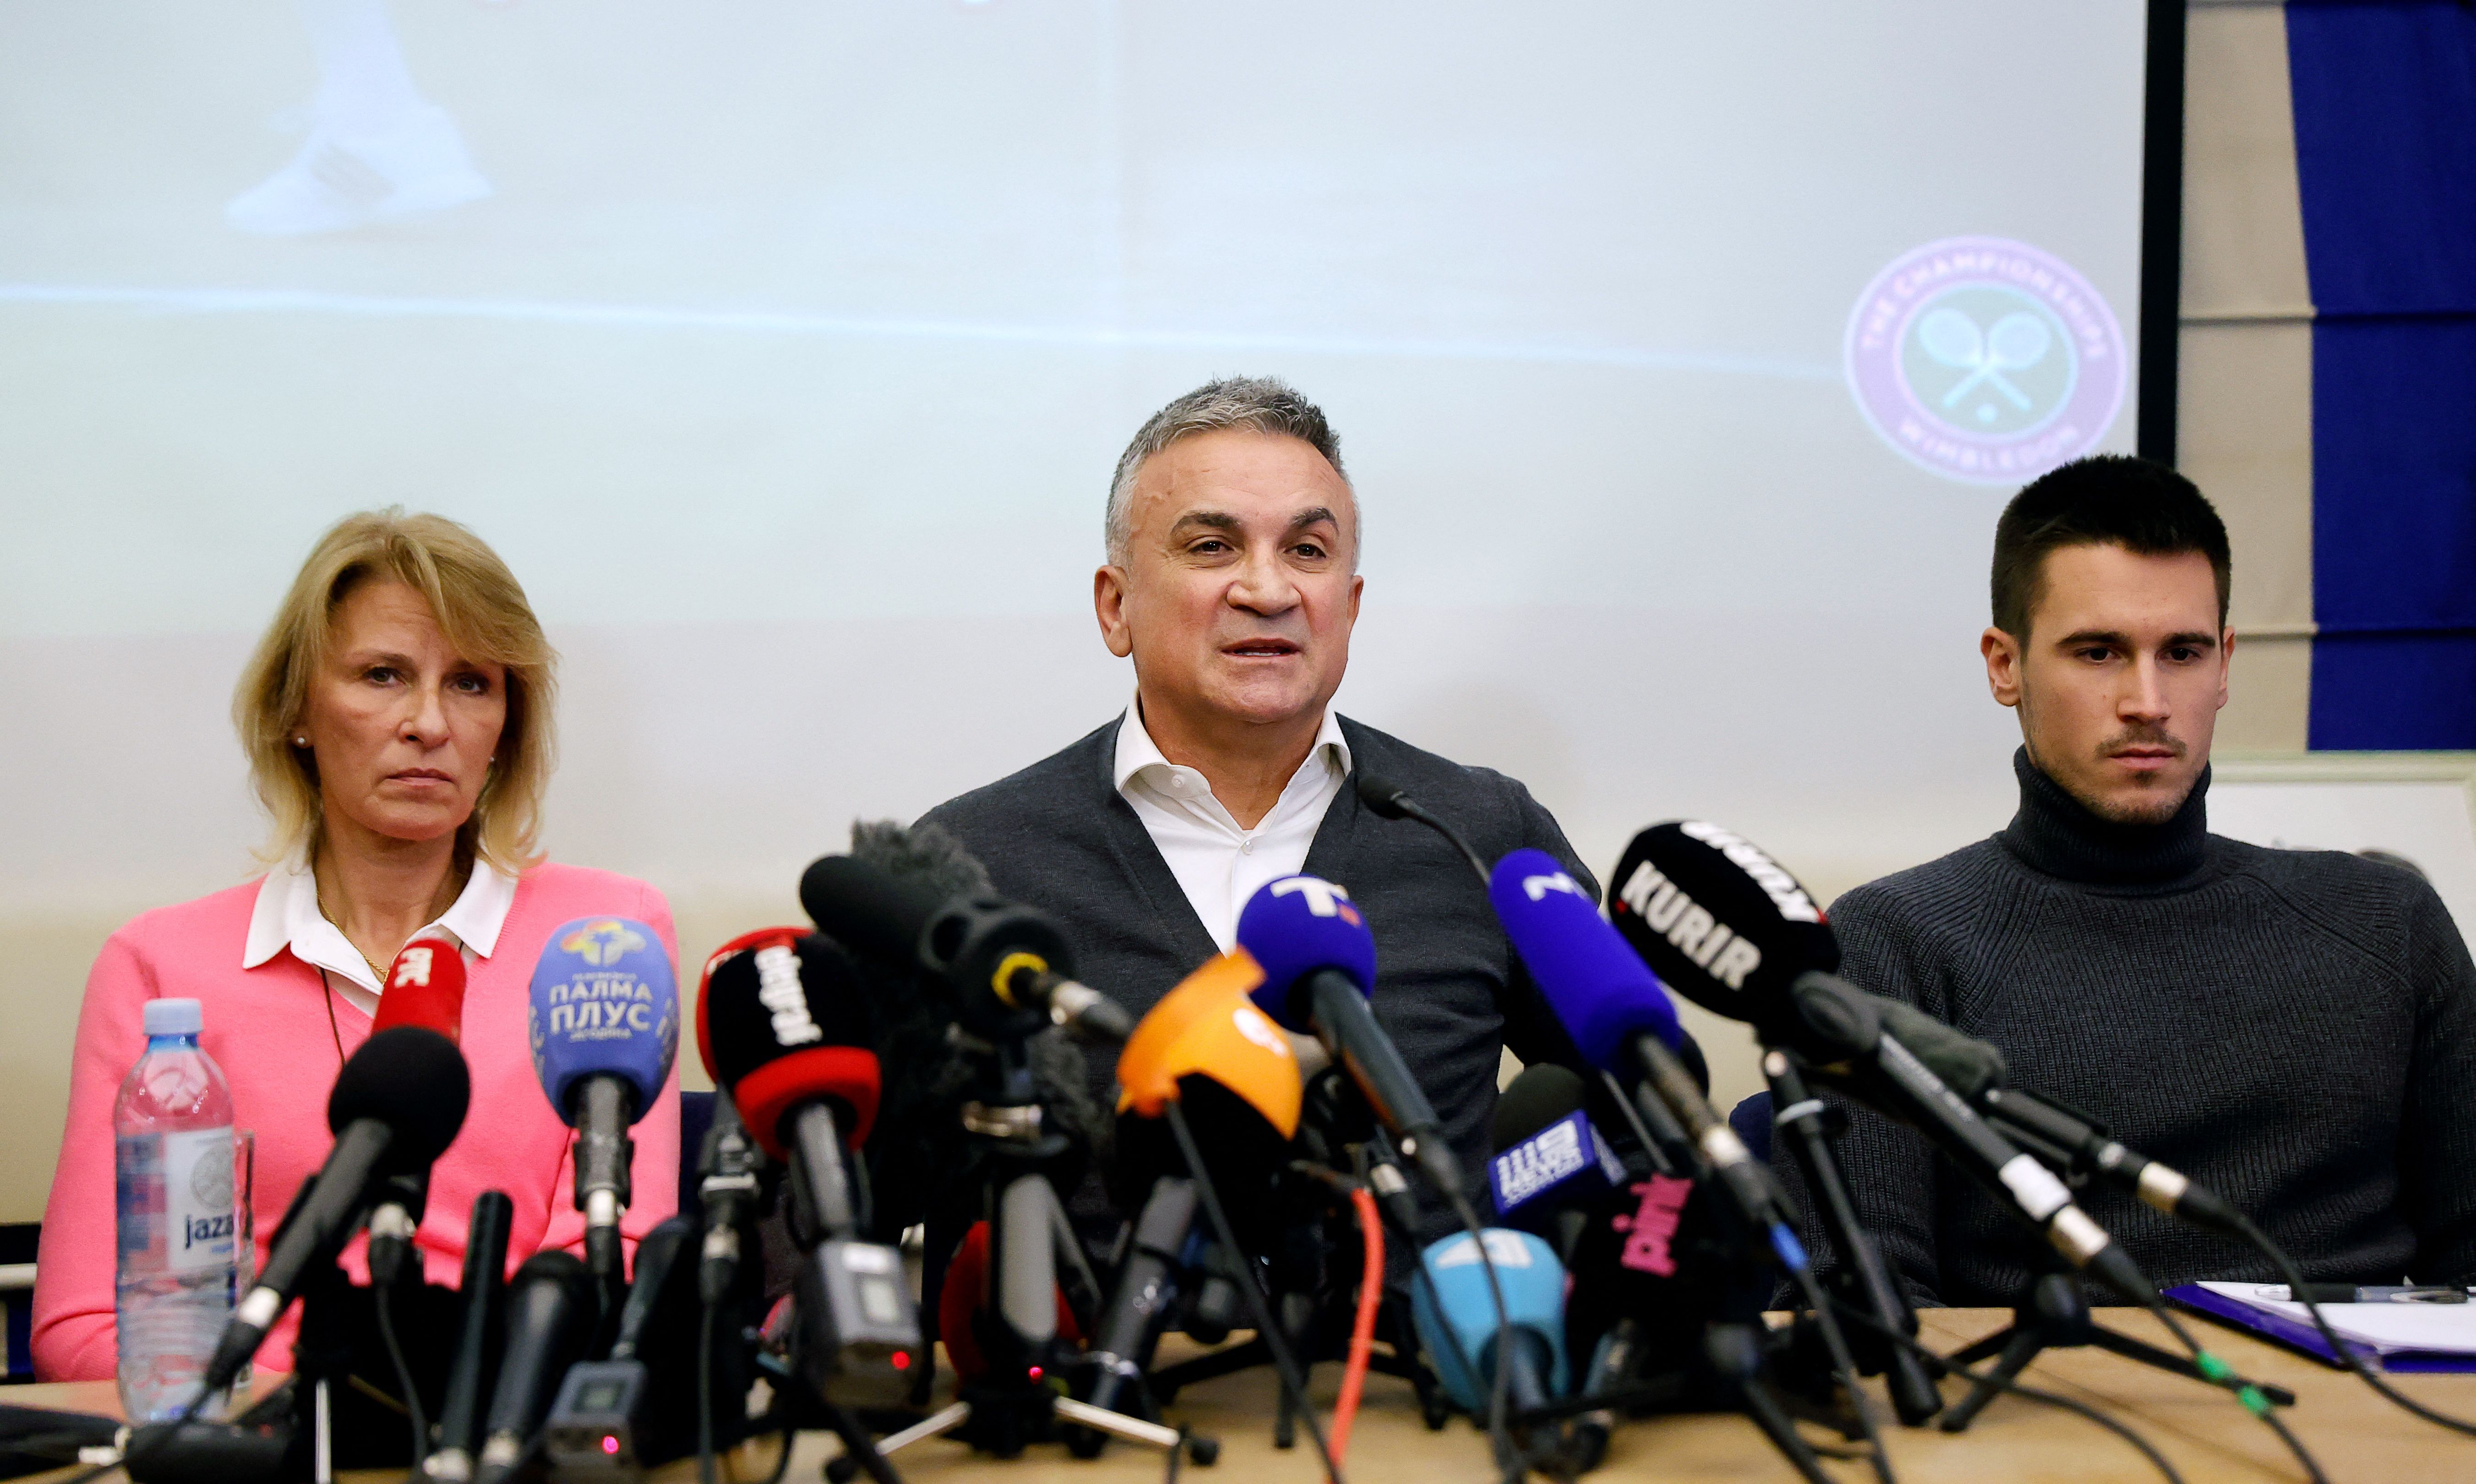 From left to right, Serbian tennis player Novak Djokovic's mother Dijana, father Srdjan and brother Djordje hold a news conference in Belgrade, on Monday, after a judge in Australia overturned the cancelation of the tennis star's visa.